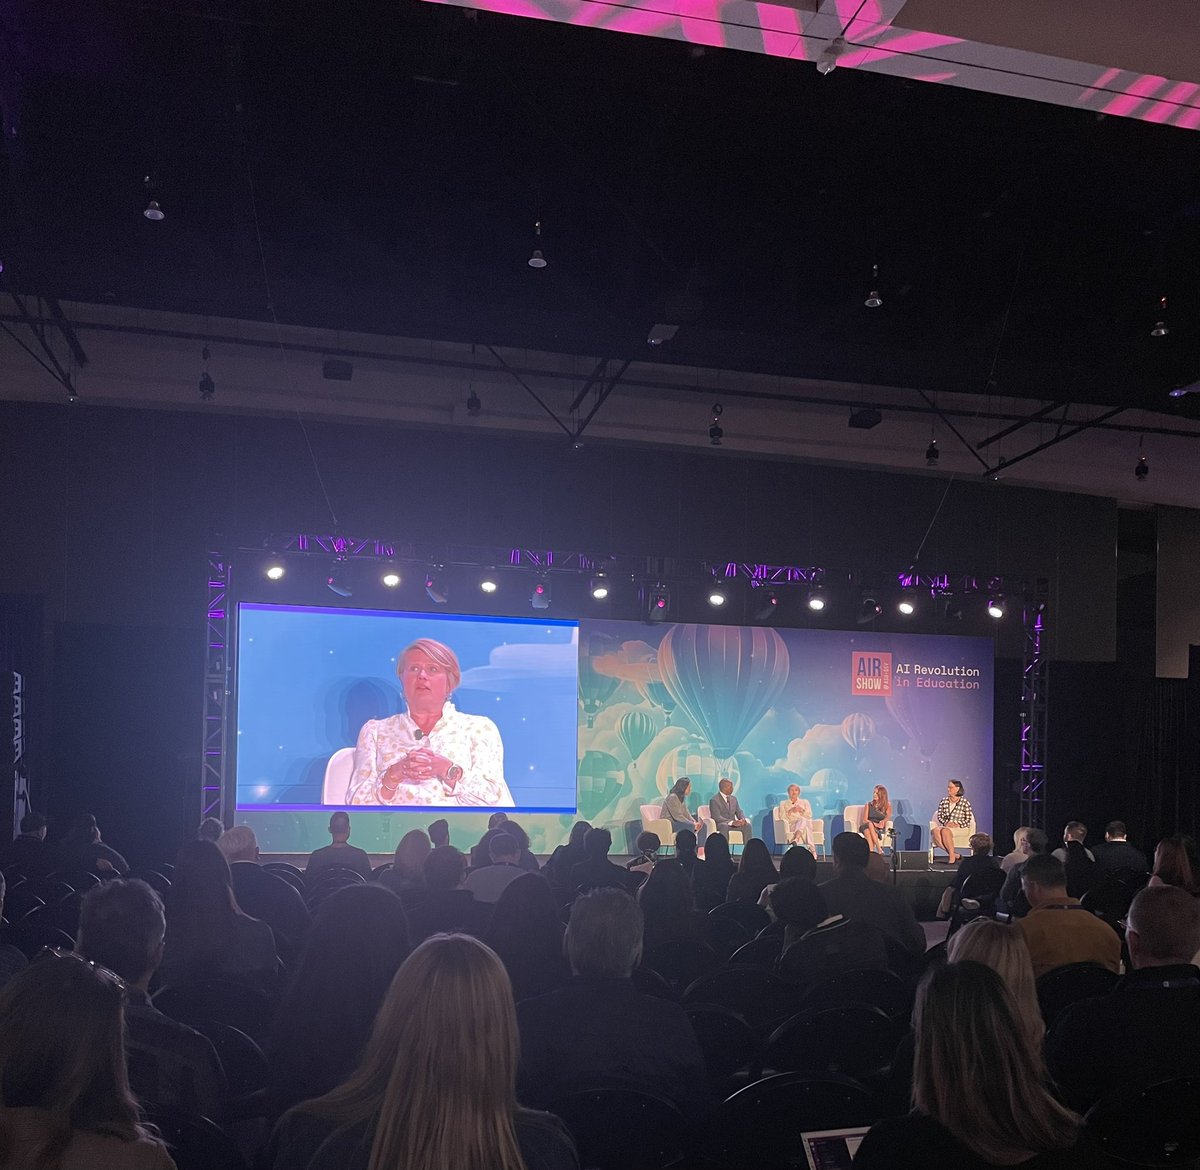 Awesome to be on a panel with @NDDPI, @NVSupt and @CADeptEd during the @ASUGSVSummit AIR Show to discuss “Where is AI Taking Our Education System?” Thoughtful discussion about how we can use AI to serve students and how it can be responsibly integrated into daily life. #nced